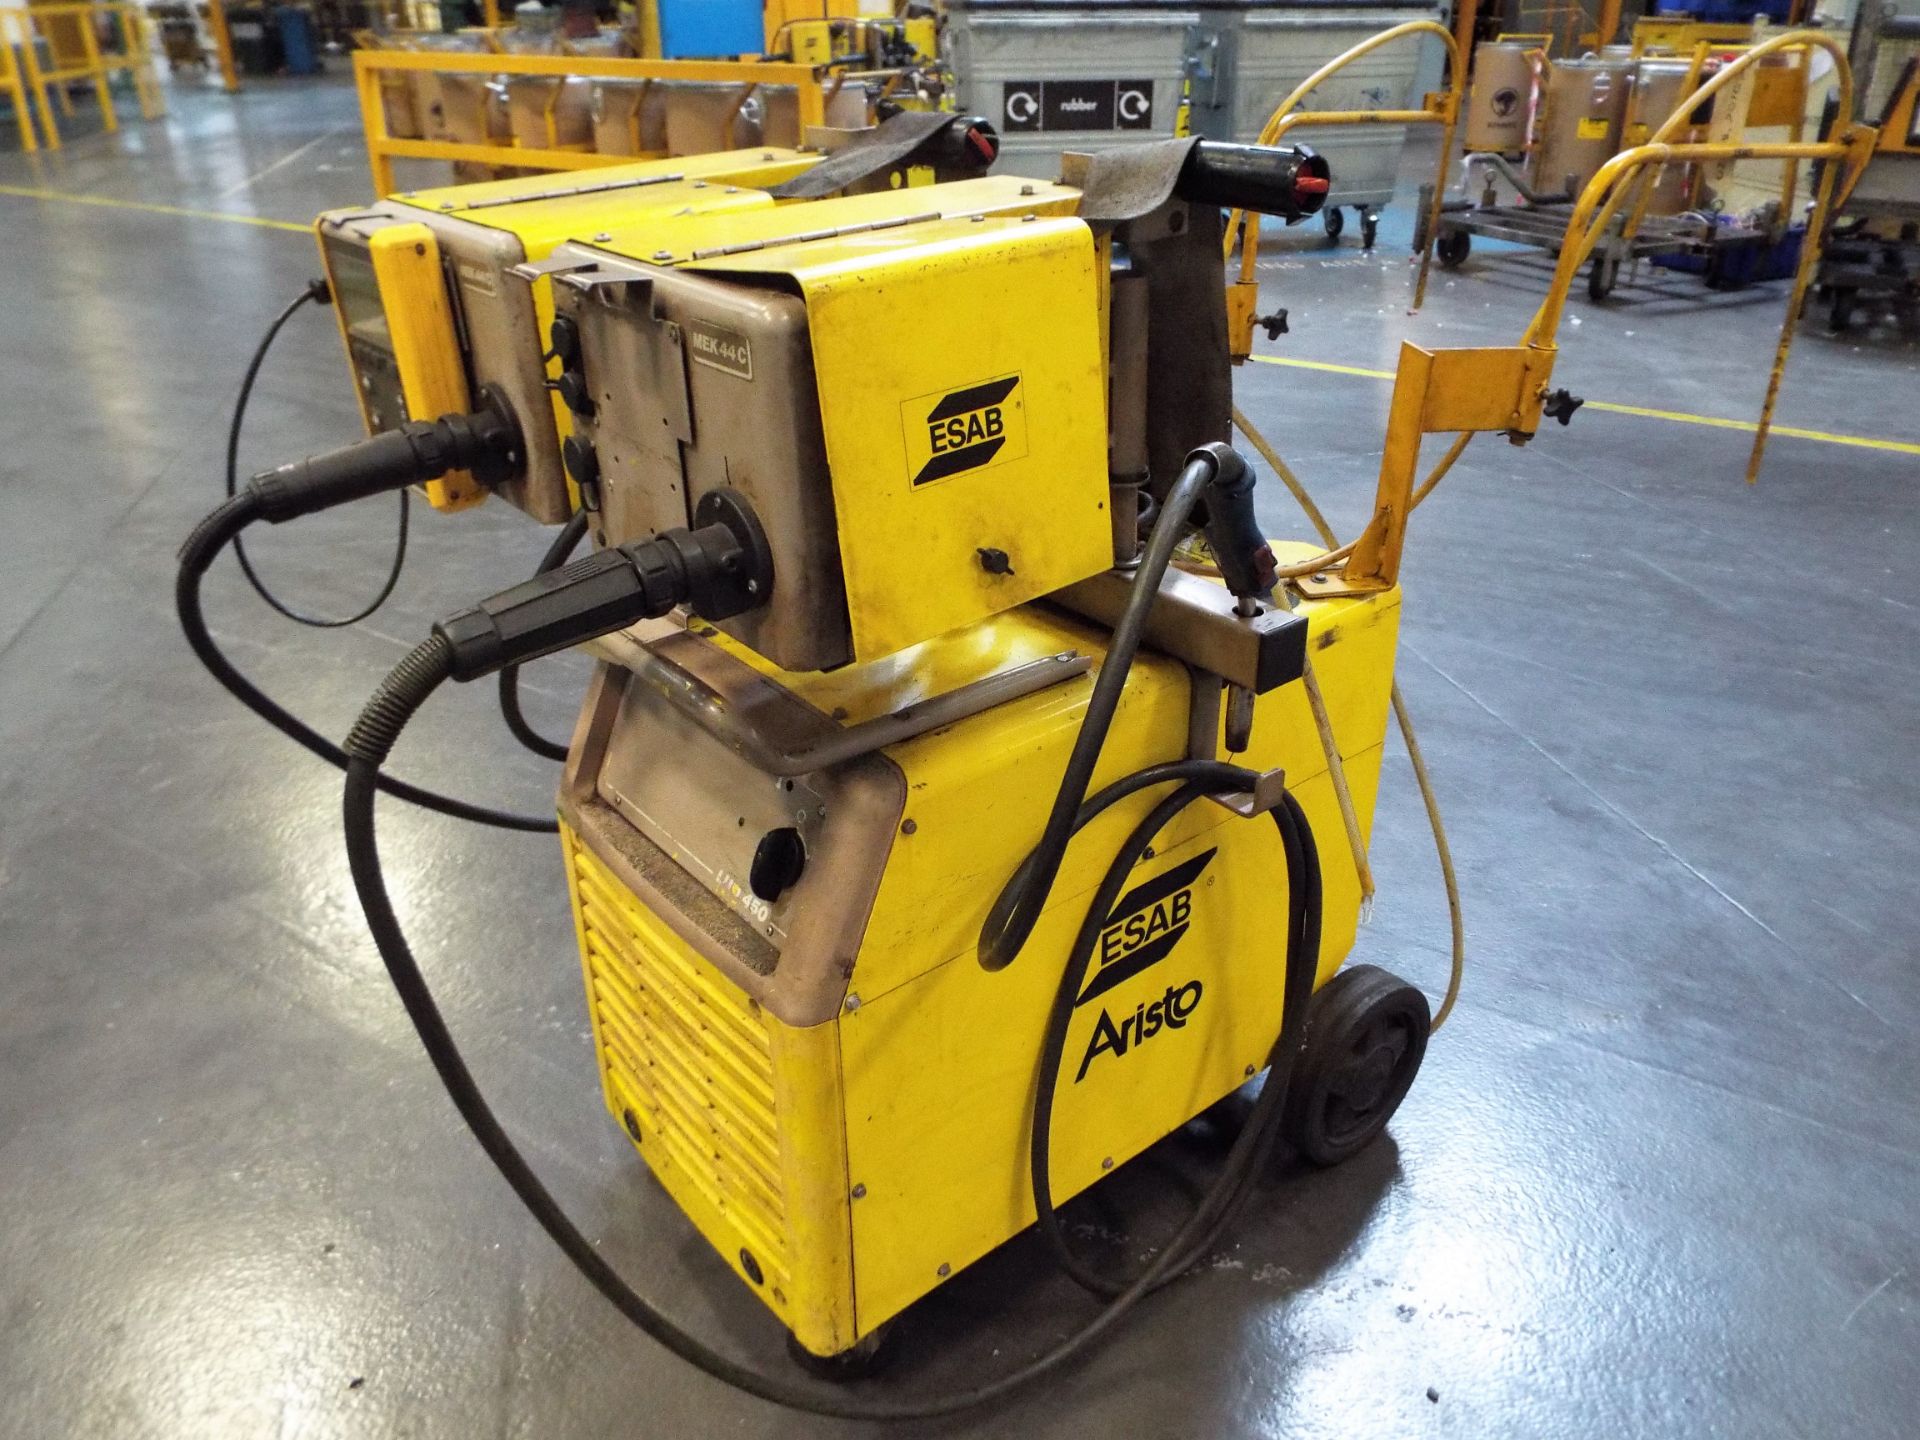 Esab Aristo Portable Welding Set (Dual Station Wire Feed) - Image 2 of 11